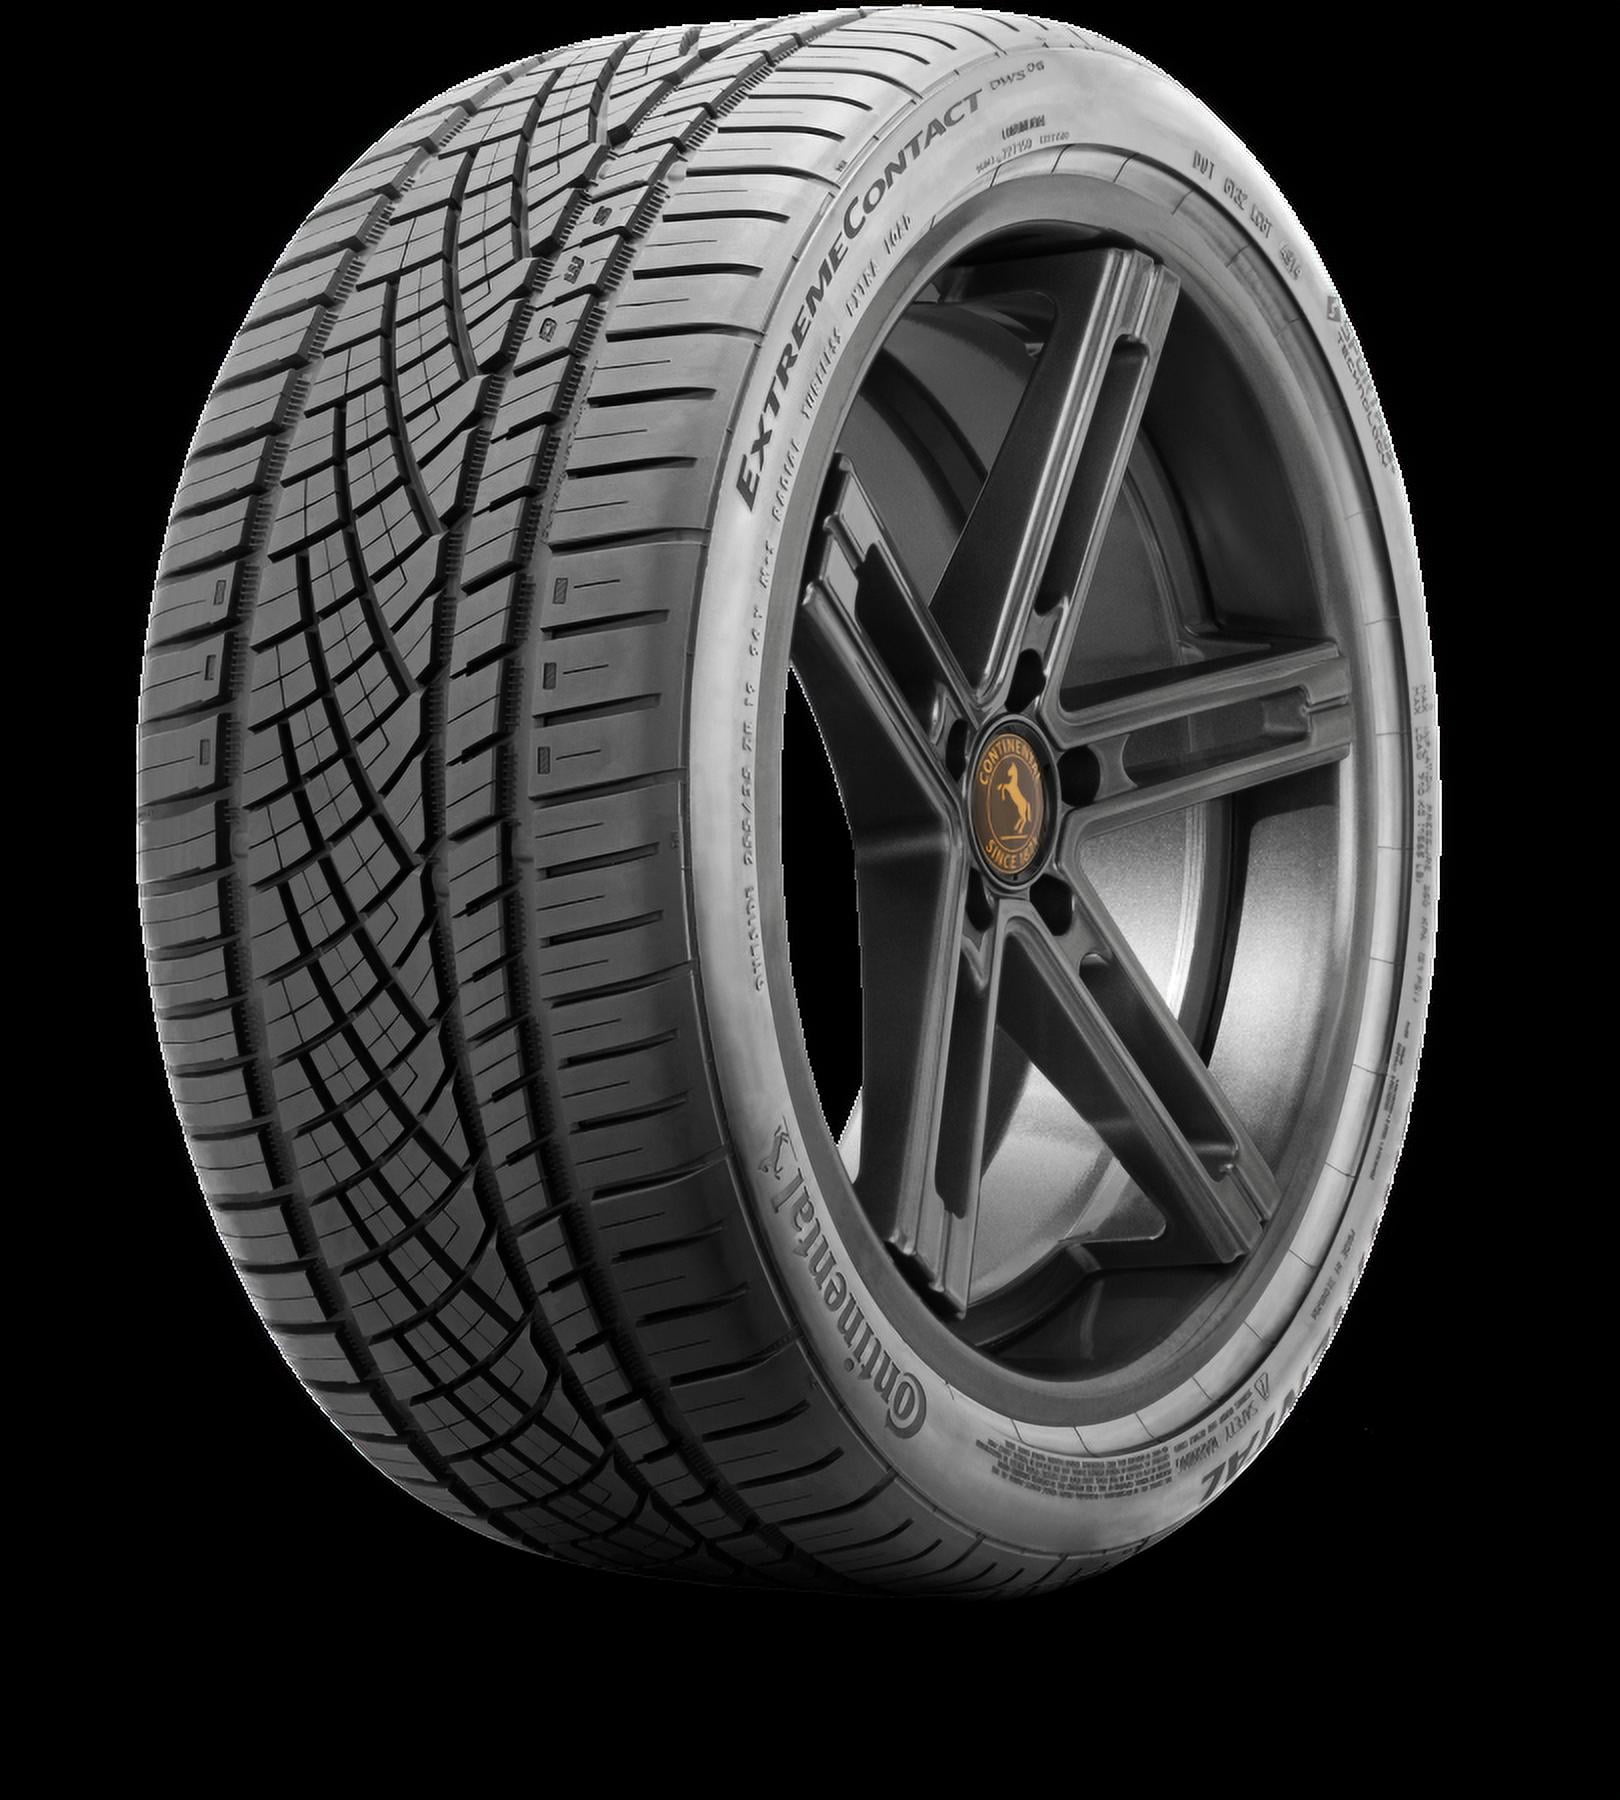 Continental ExtremeContact DWS06 285/30R22 101 Y Tire